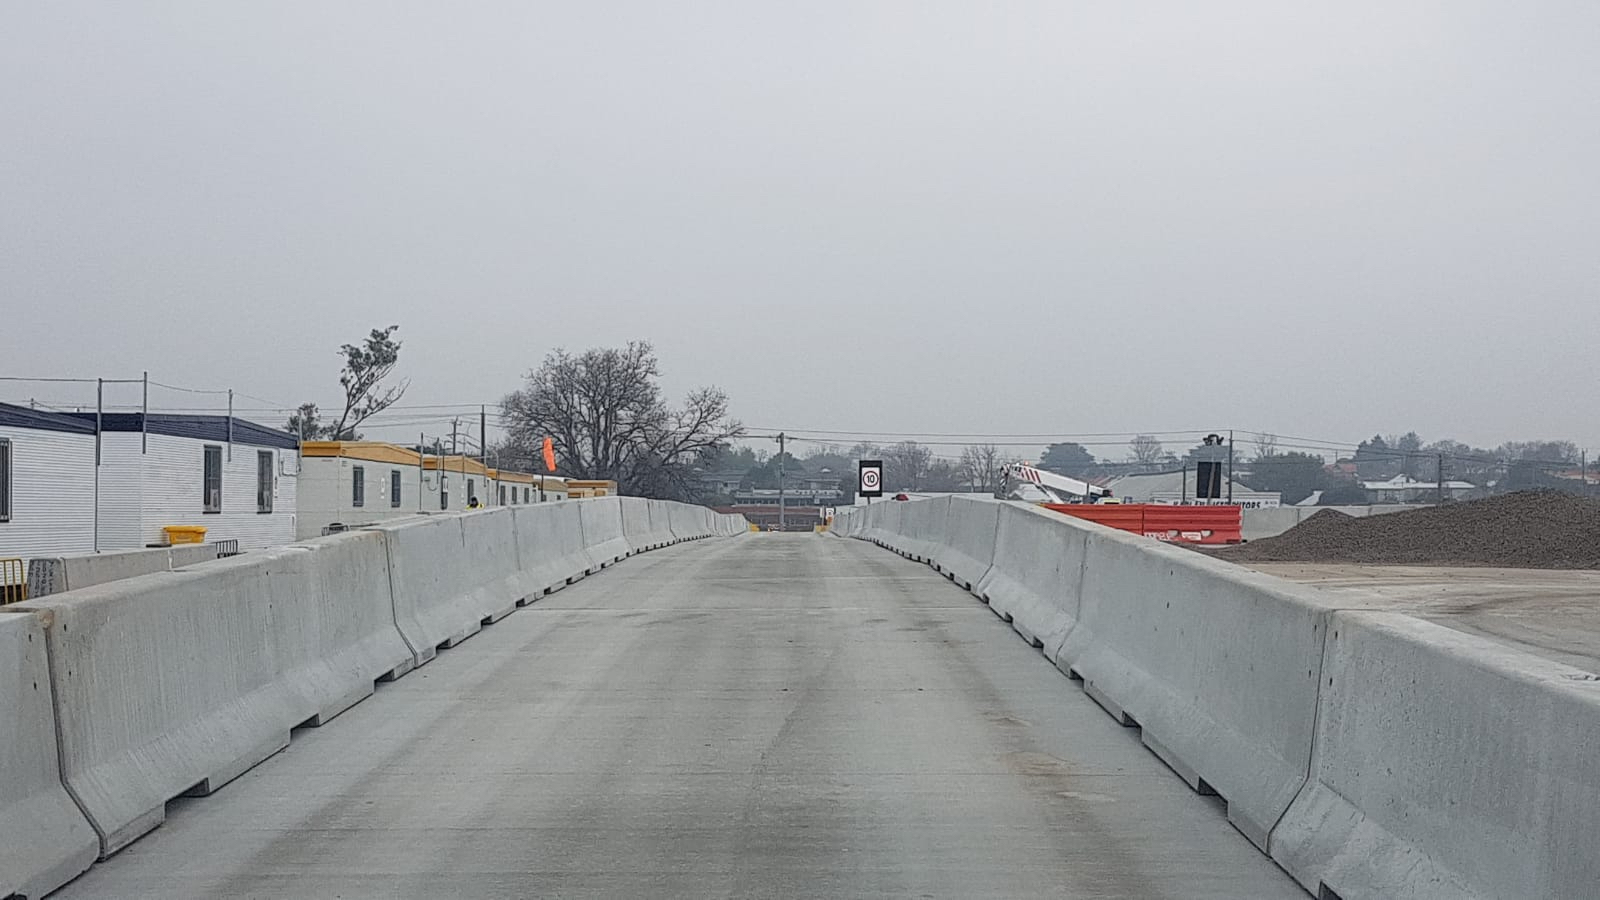 DB80 Concrete Barriers for West Gate Tunnel Project